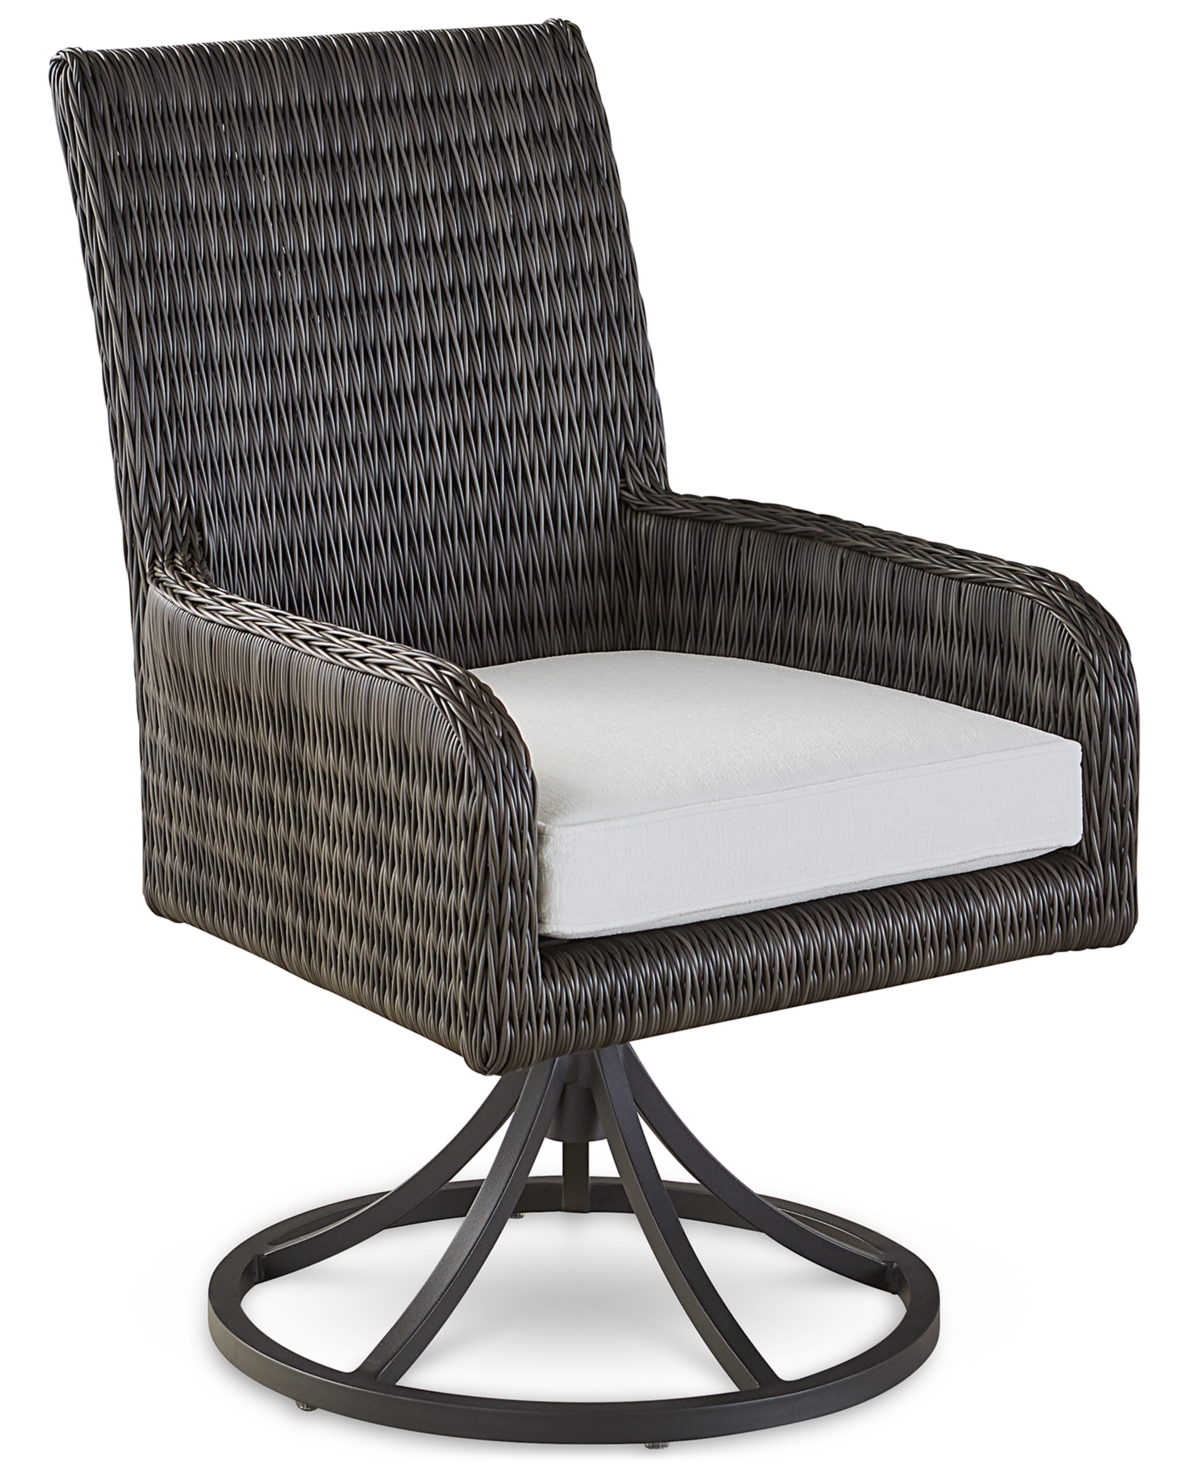 Tommy Bahama Cypress Point Outdoor Swivel Rocker Dining Chair In Parchment